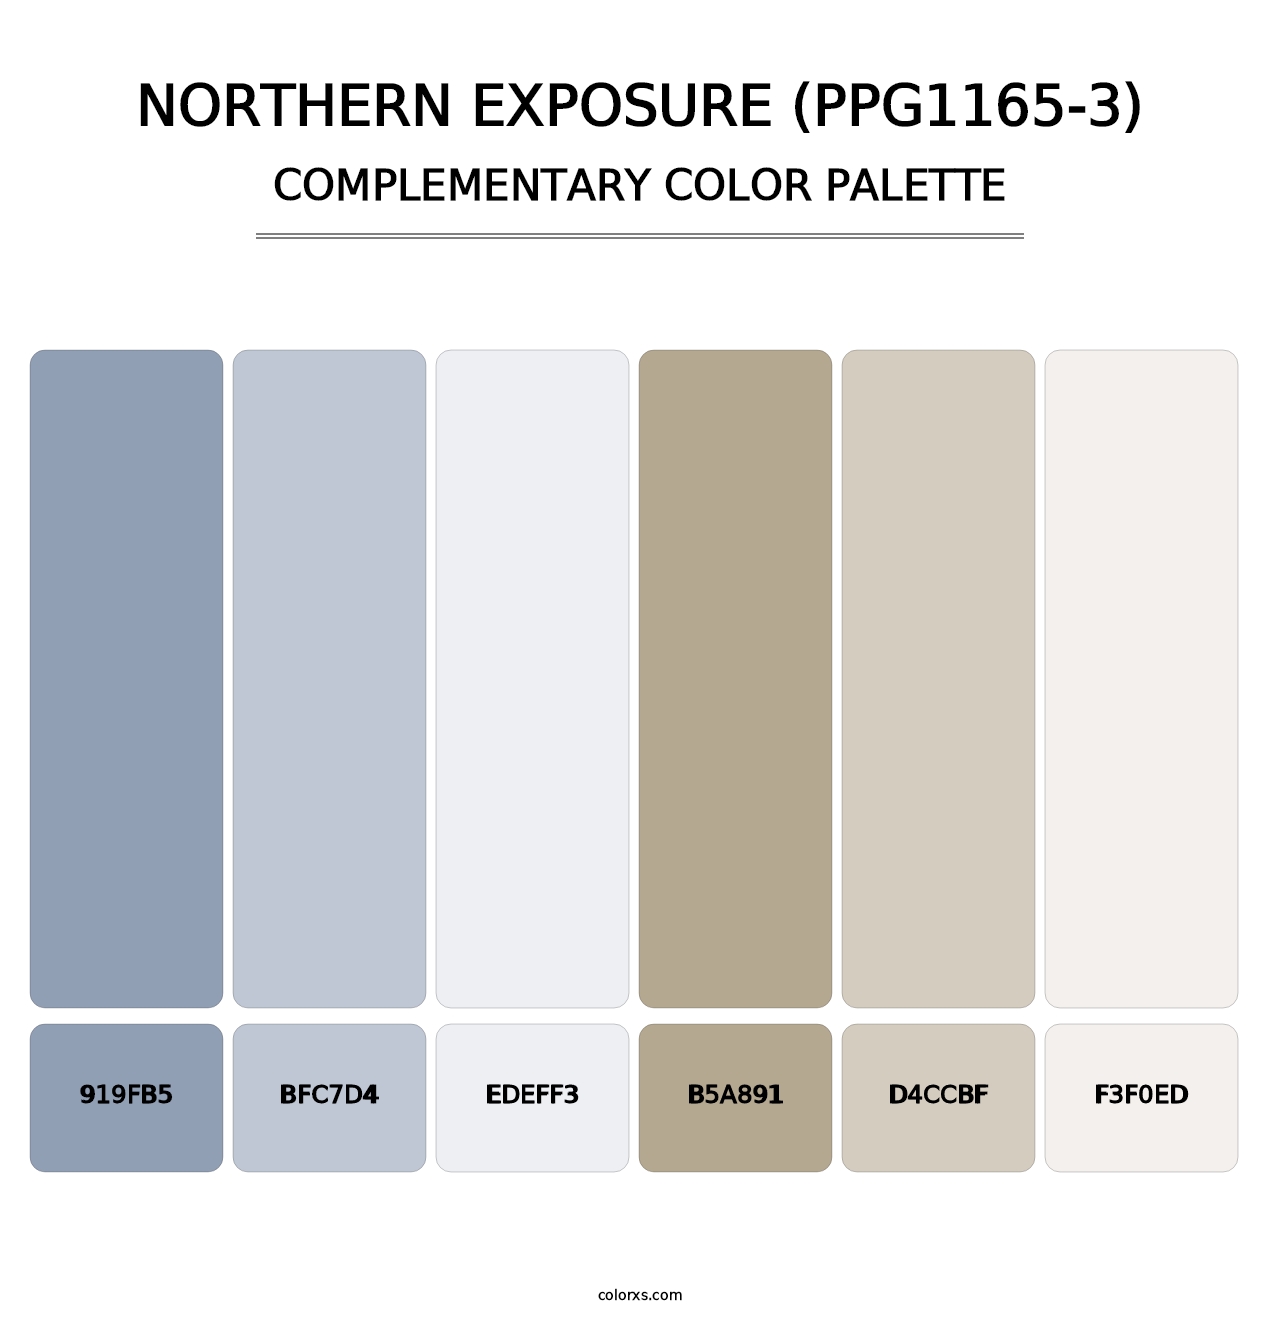 Northern Exposure (PPG1165-3) - Complementary Color Palette